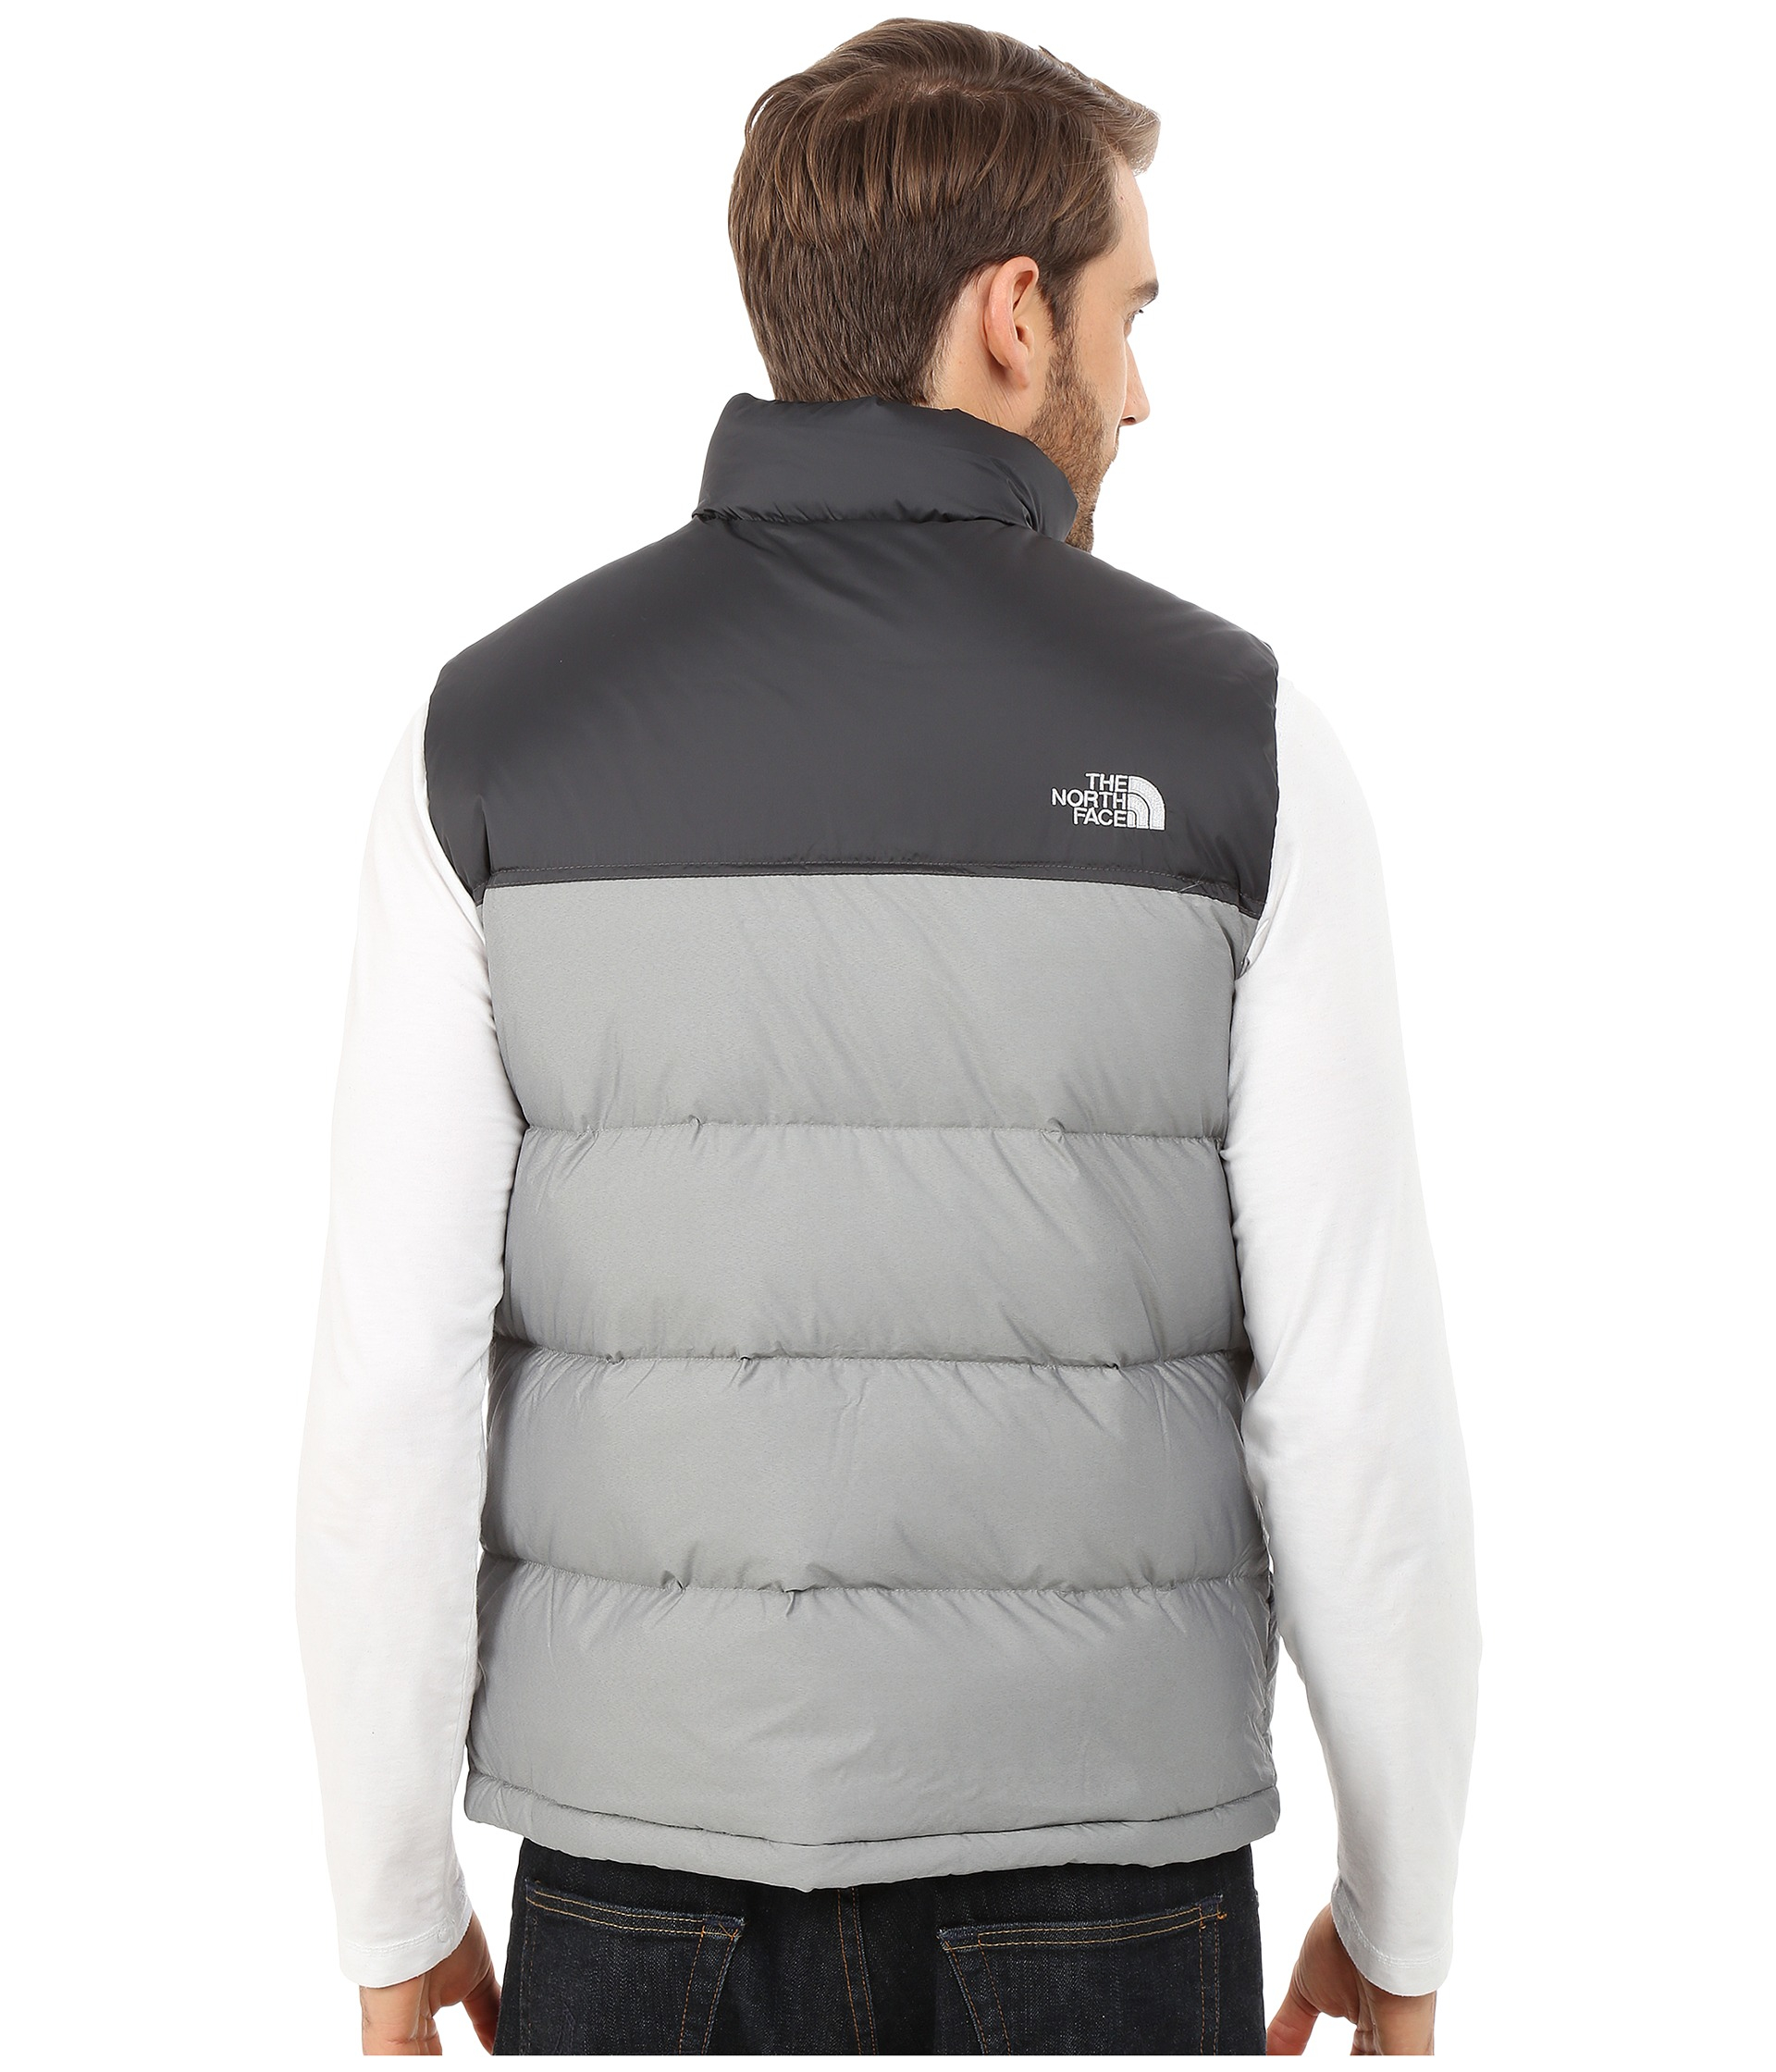 The North Face Nuptse Vest in Gray for Men - Lyst